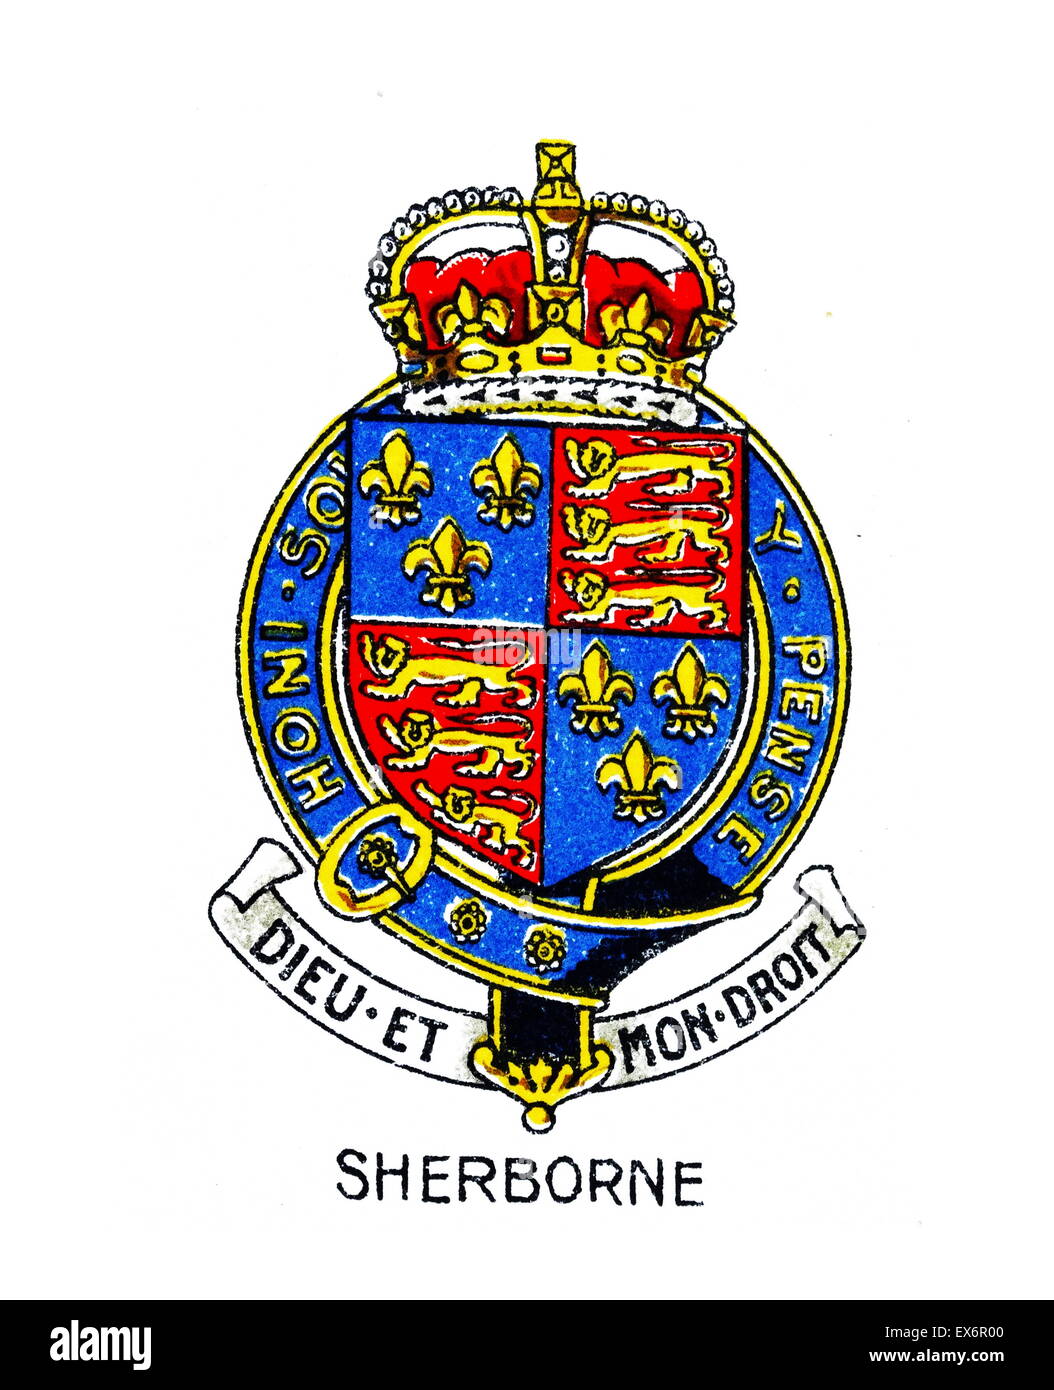 Emblem for Sherborne School, Coventry, West Midlands, exists to support the development of Sherborne. Stock Photo